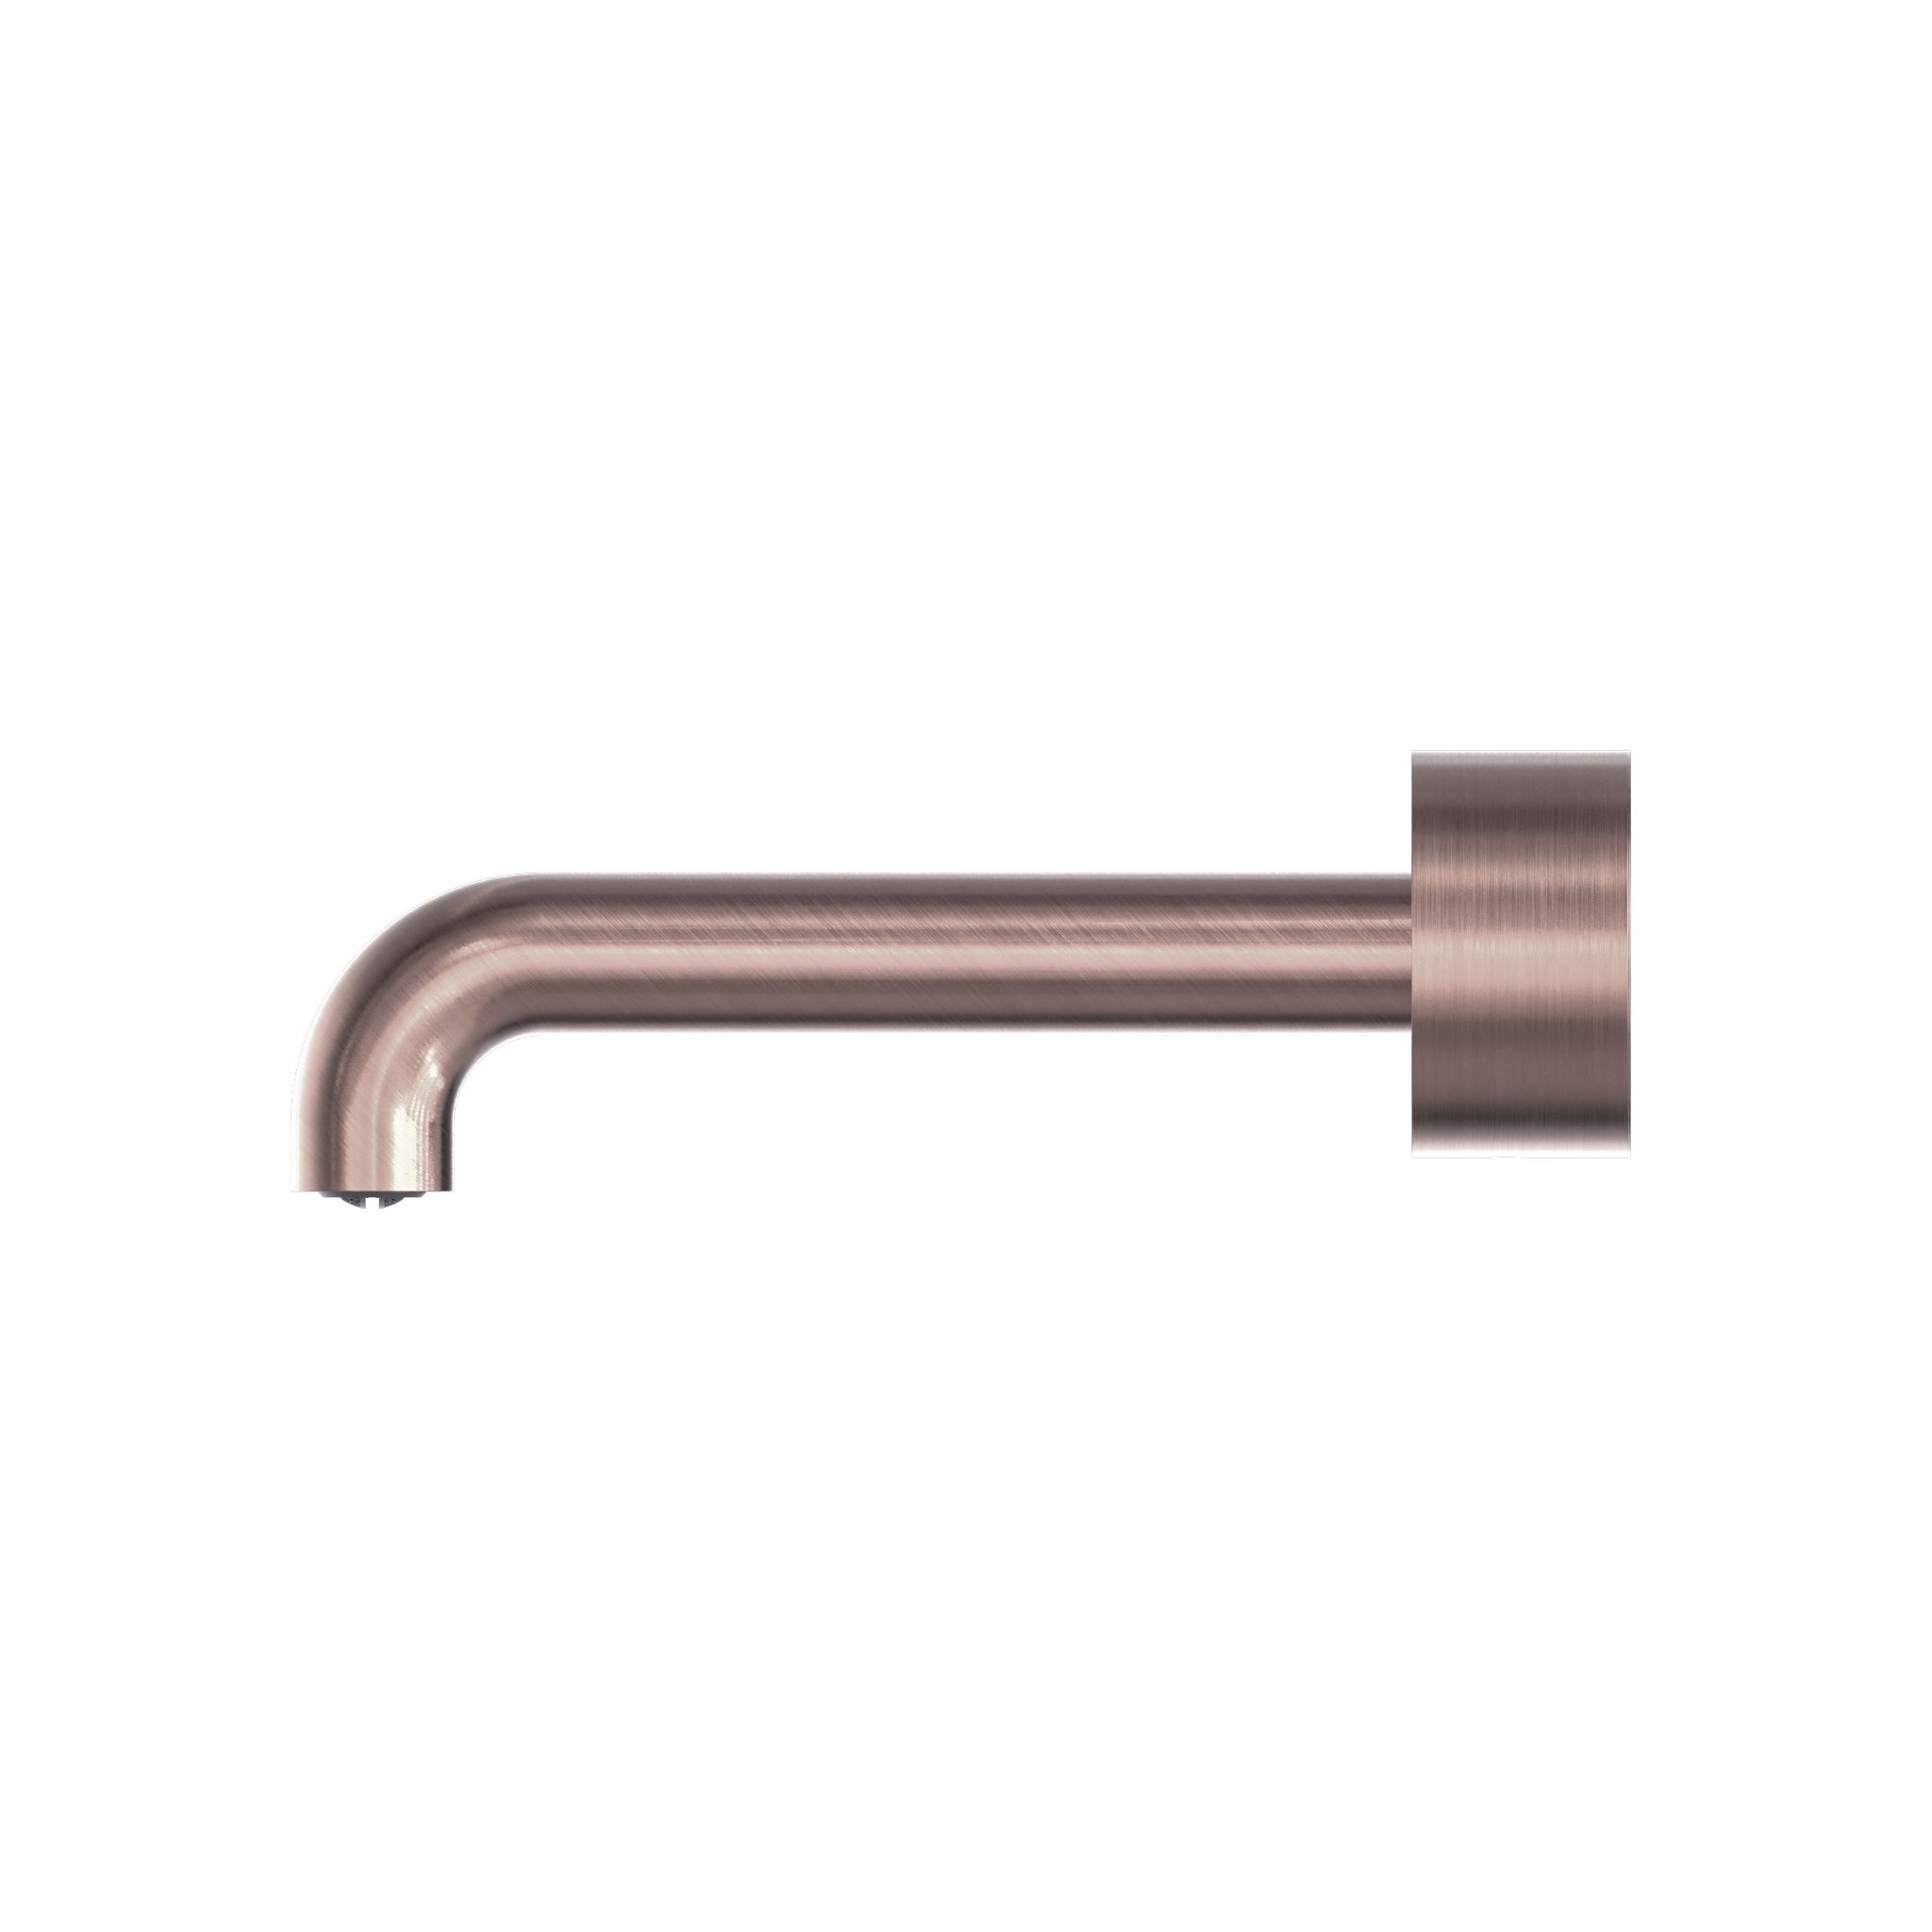 NERO KARA PROGRESSIVE WALL BASIN/ BATH SET BRUSHED BRONZE (AVAILABLE IN 120MM, 160MM, 185MM, 230MM AND 260MM)